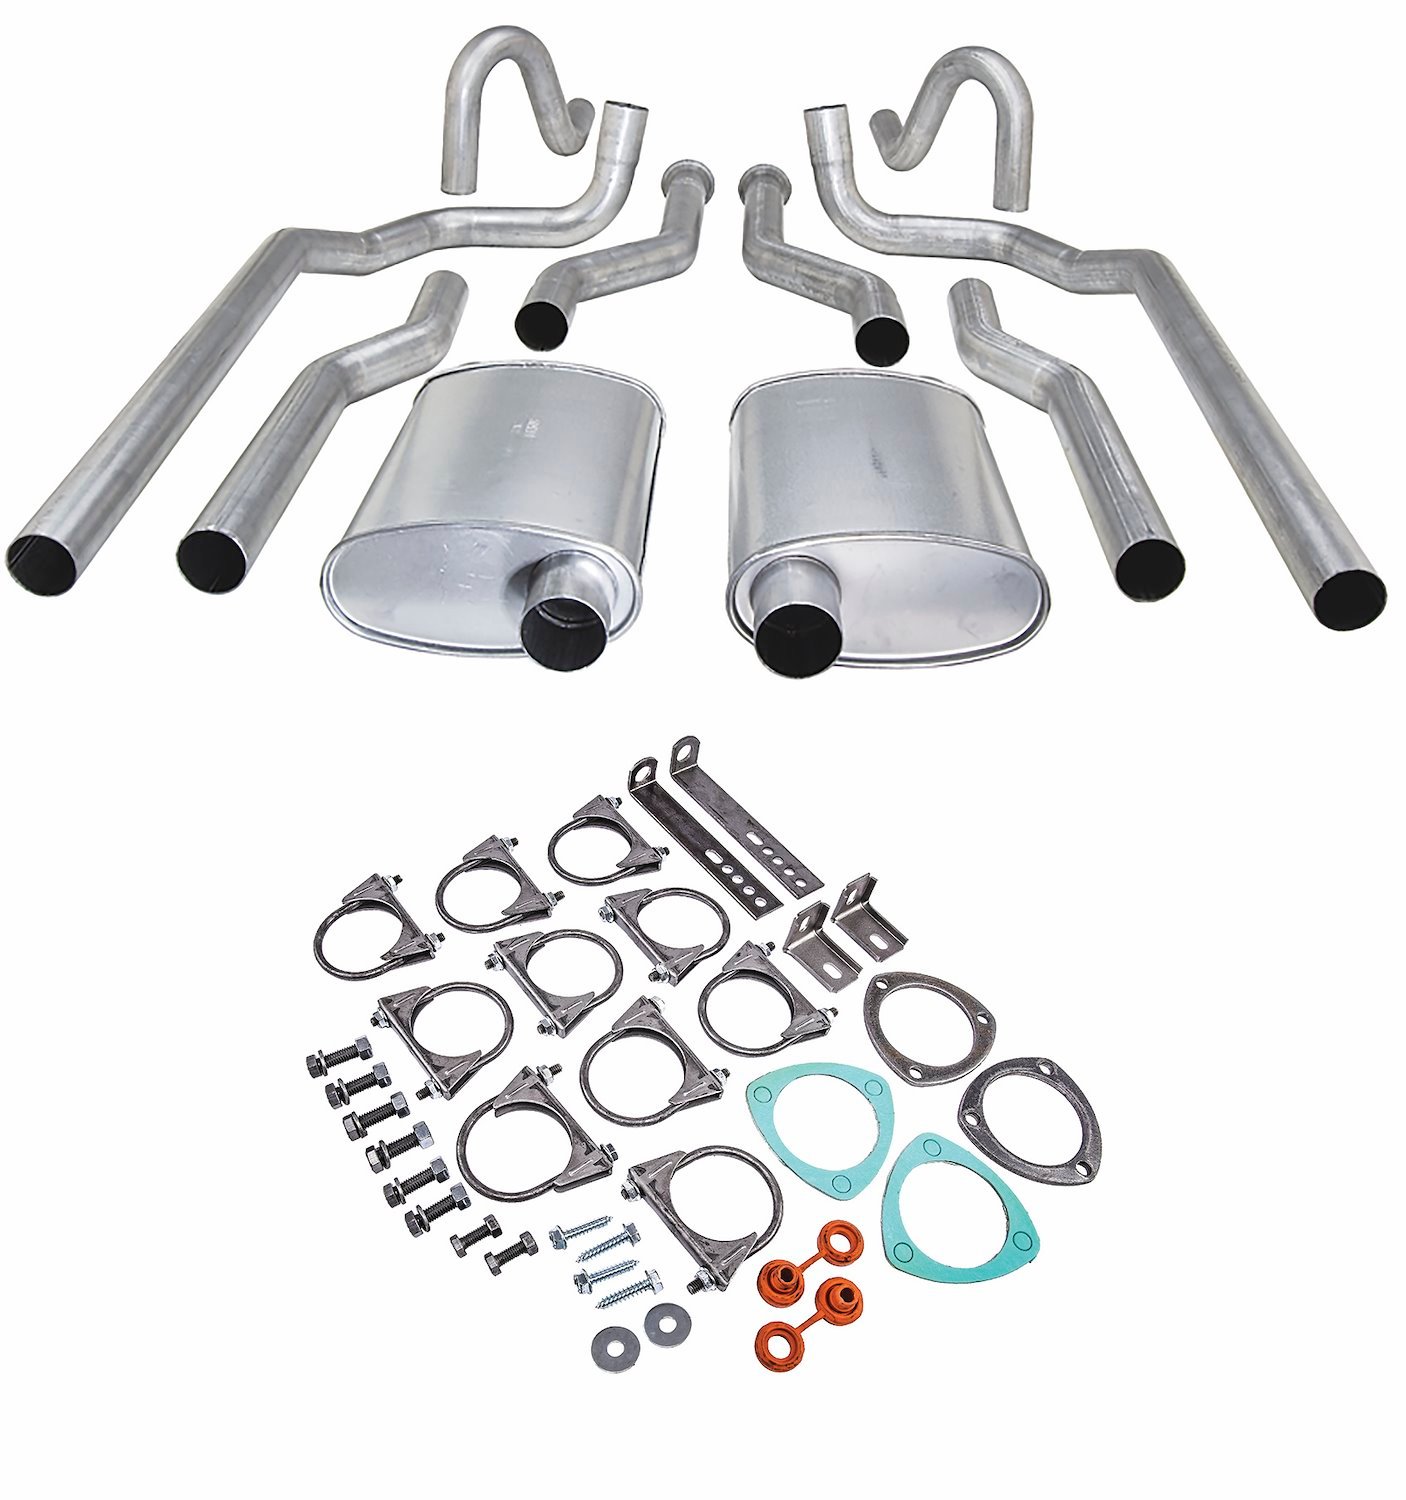 Header-Back Dual 2-1/2 in. Exhaust Kit 1964-1972 Chevelle/El